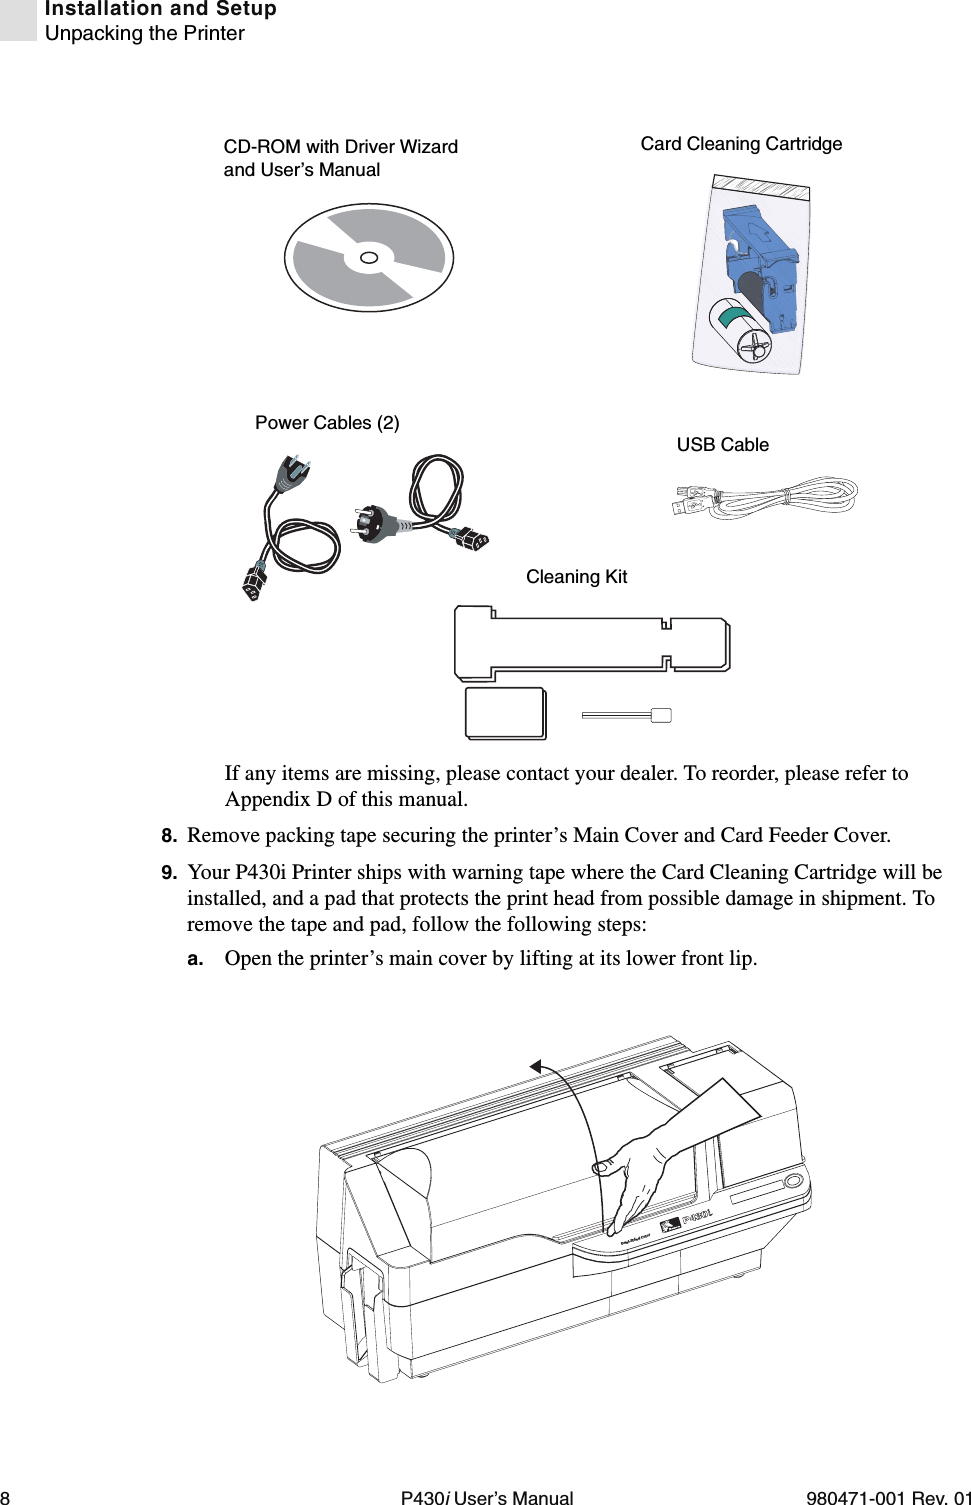 8P430i User’s Manual 980471-001 Rev. 01Installation and SetupUnpacking the PrinterIf any items are missing, please contact your dealer. To reorder, please refer to Appendix D of this manual.8. Remove packing tape securing the printer’s Main Cover and Card Feeder Cover.9. Your P430i Printer ships with warning tape where the Card Cleaning Cartridge will be installed, and a pad that protects the print head from possible damage in shipment. To remove the tape and pad, follow the following steps:a. Open the printer’s main cover by lifting at its lower front lip.Power Cables (2)Cleaning KitCD-ROM with Driver Wizard and User’s ManualCard Cleaning CartridgeUSB CableDual-Sided Color